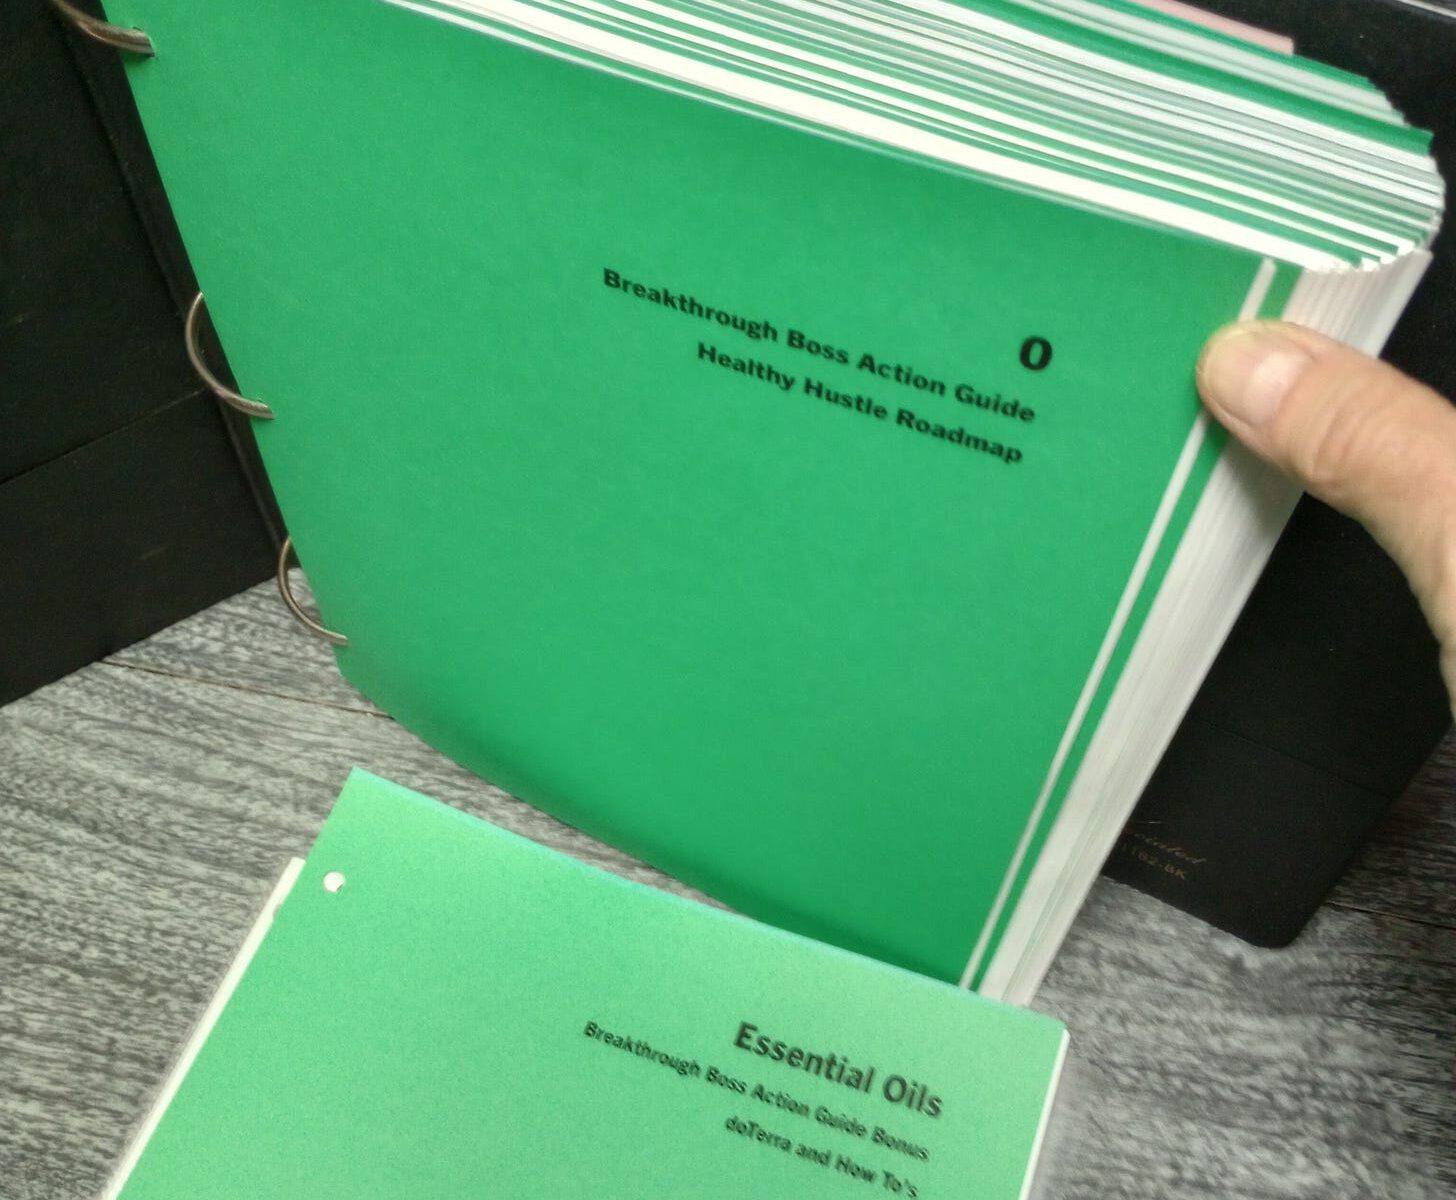 Large size three ring binder full with a printed out Action Guide and green cardstock dividers between the modules.